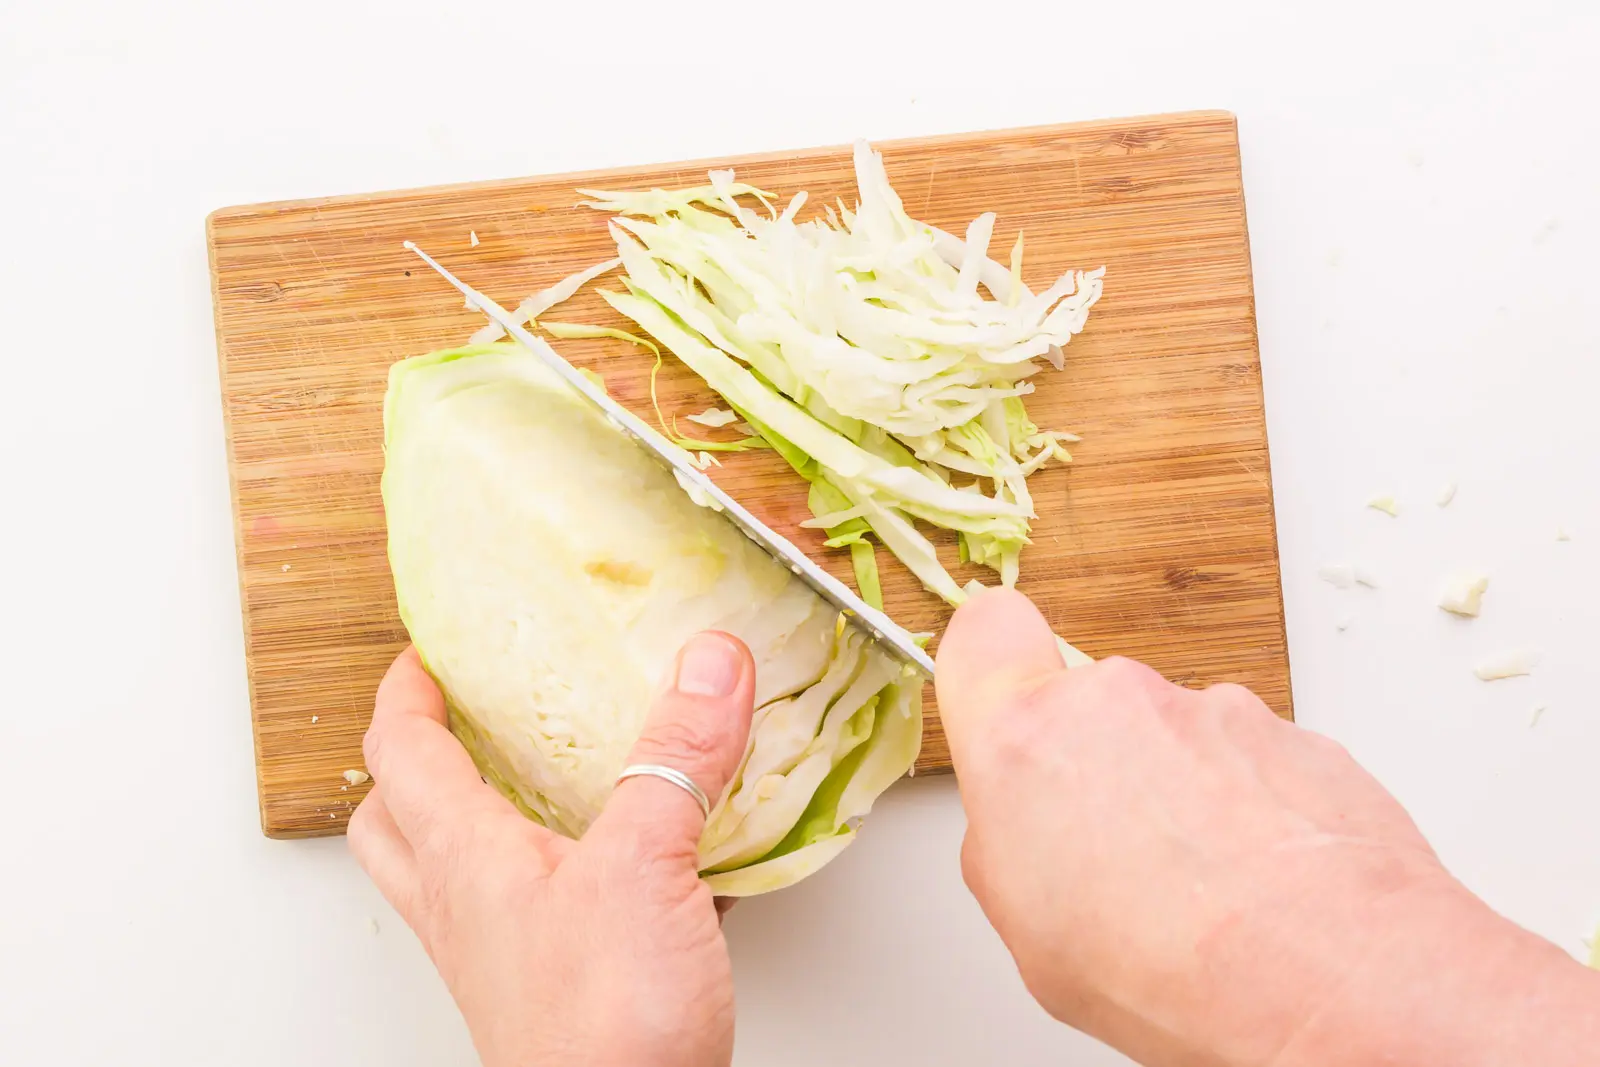 Looking down on a hand holding a chef's knife, shredding cabbage on a cutting board.